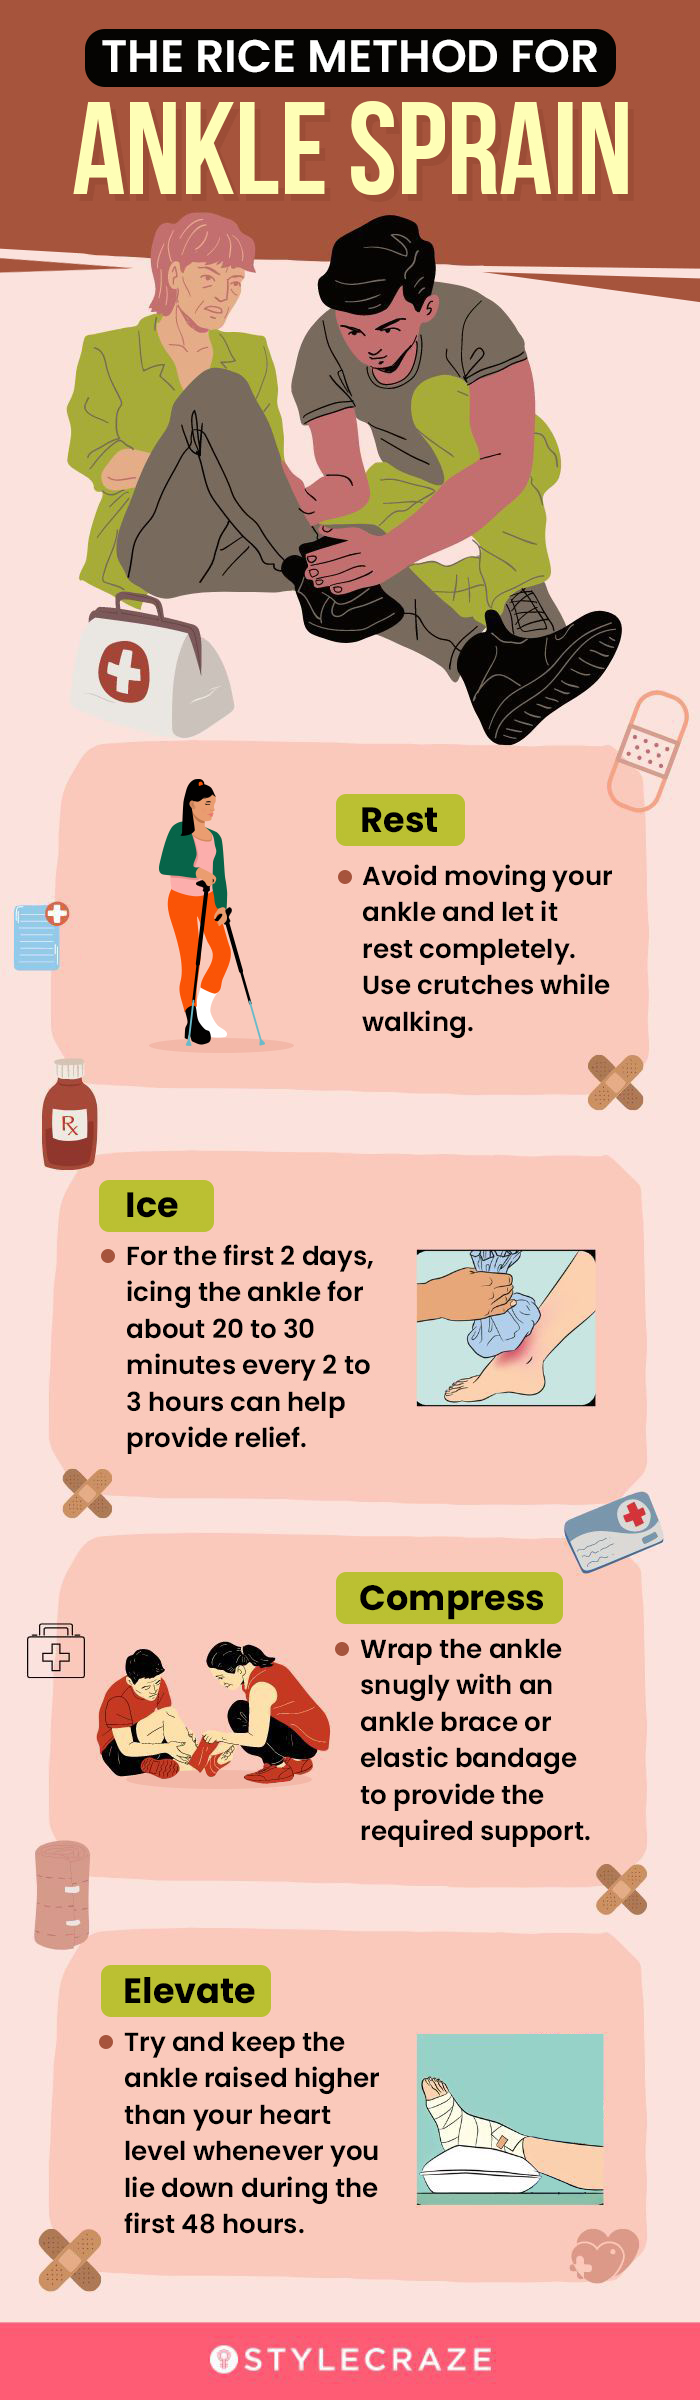 the rice method for ankle sprain (infographic)